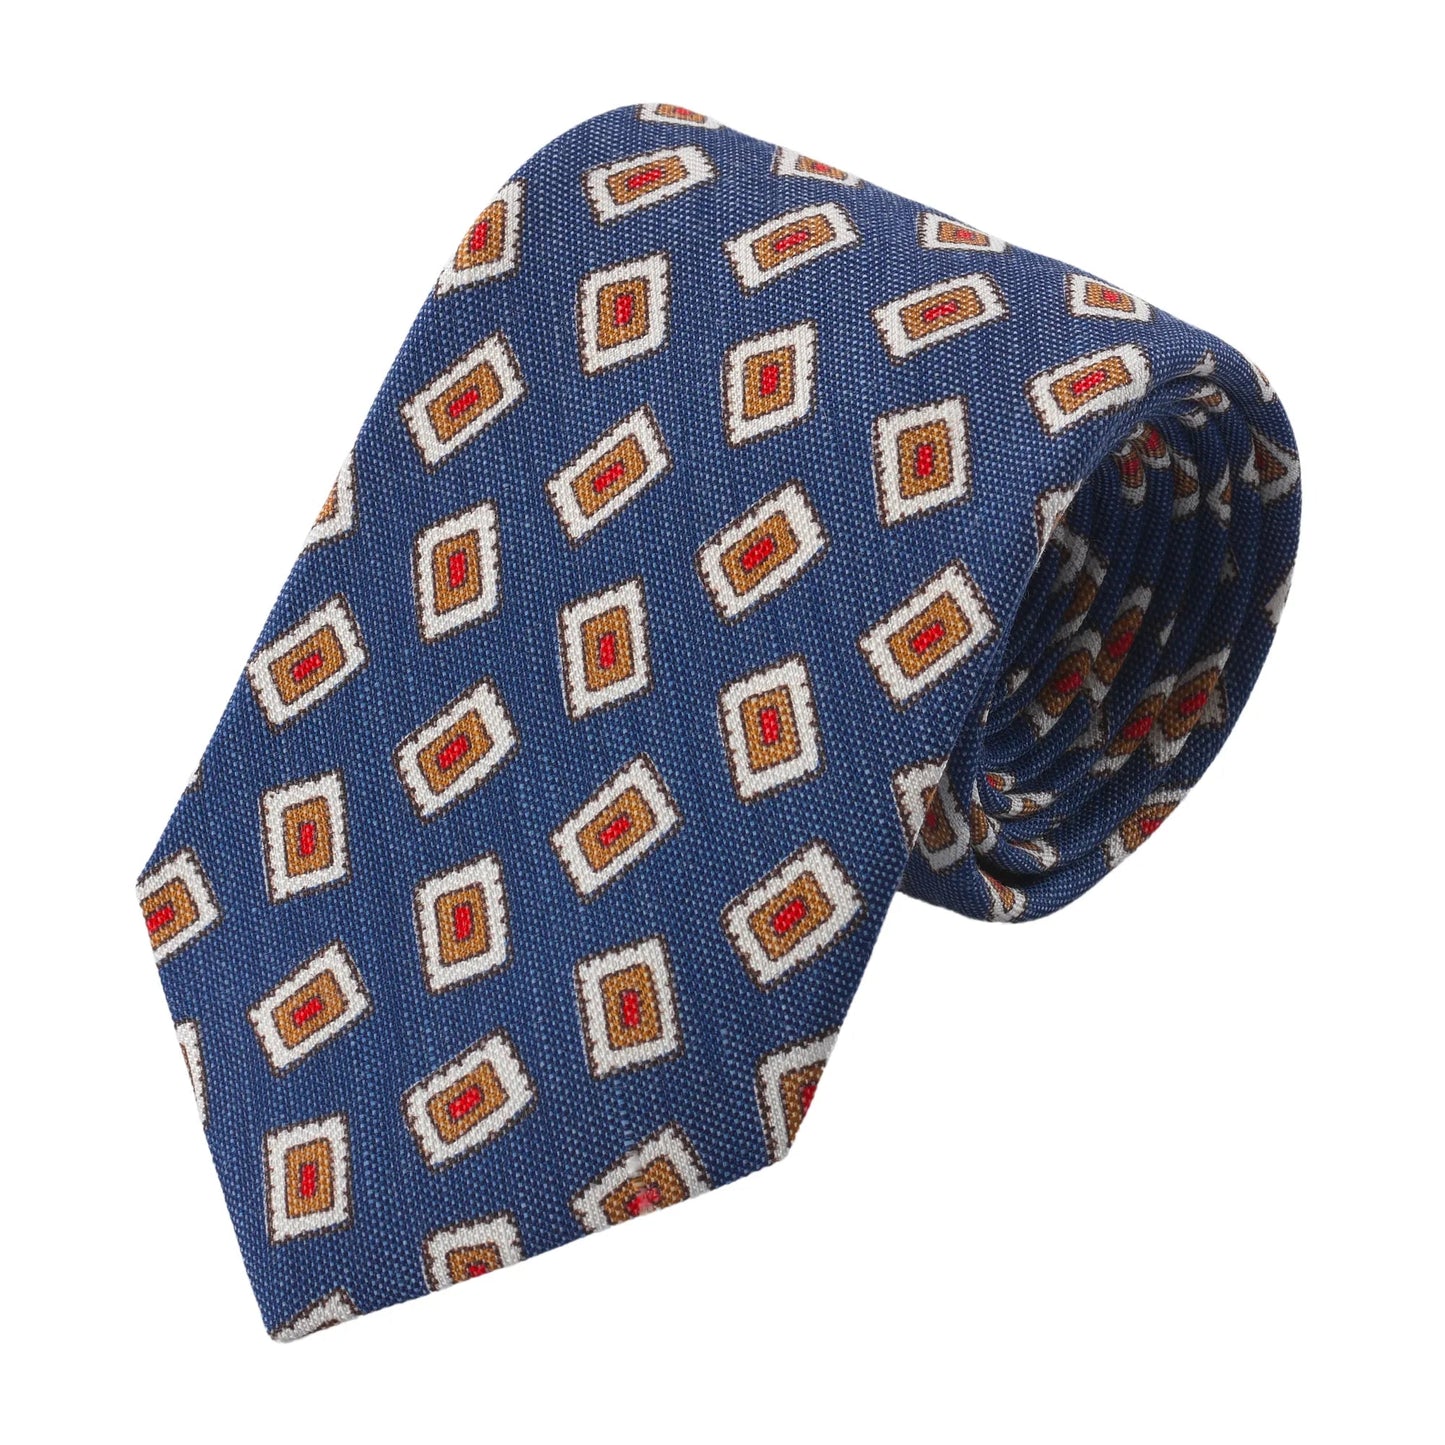 Drake's Self - Tipped Silk - Linen Tie in Blue with Pattern - SARTALE